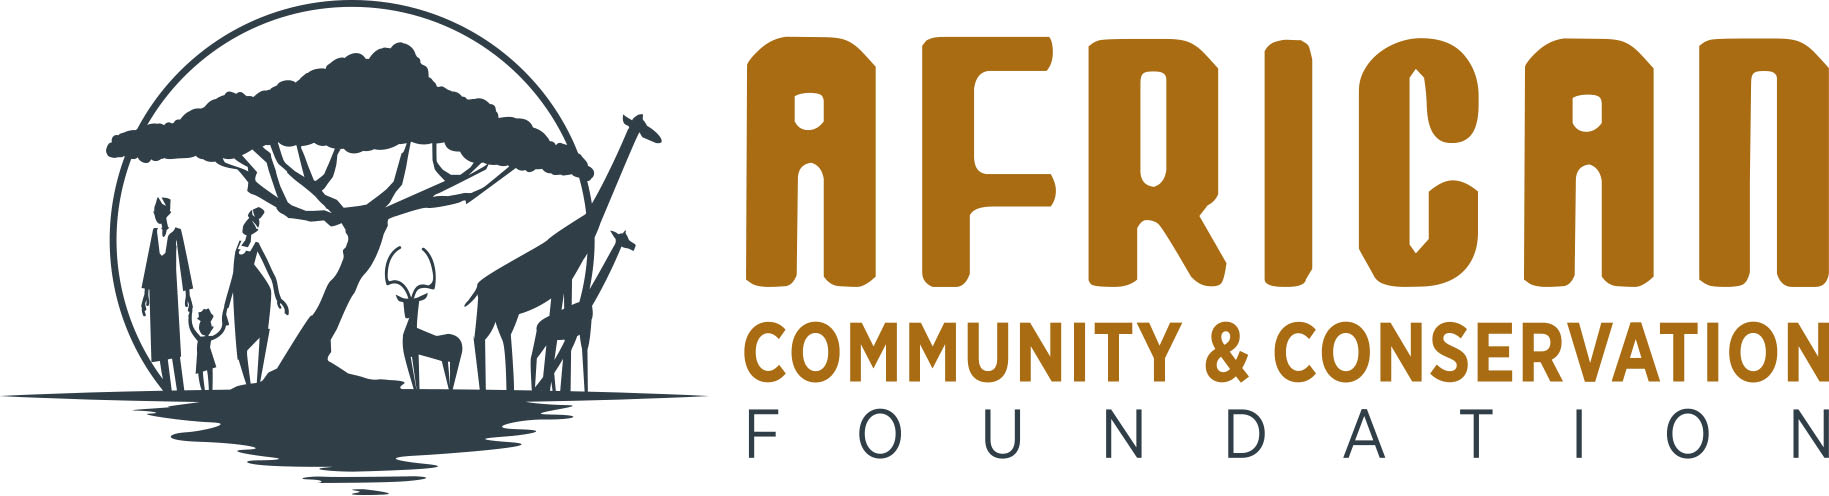 African Community & Conservation Foundation (ACCF)